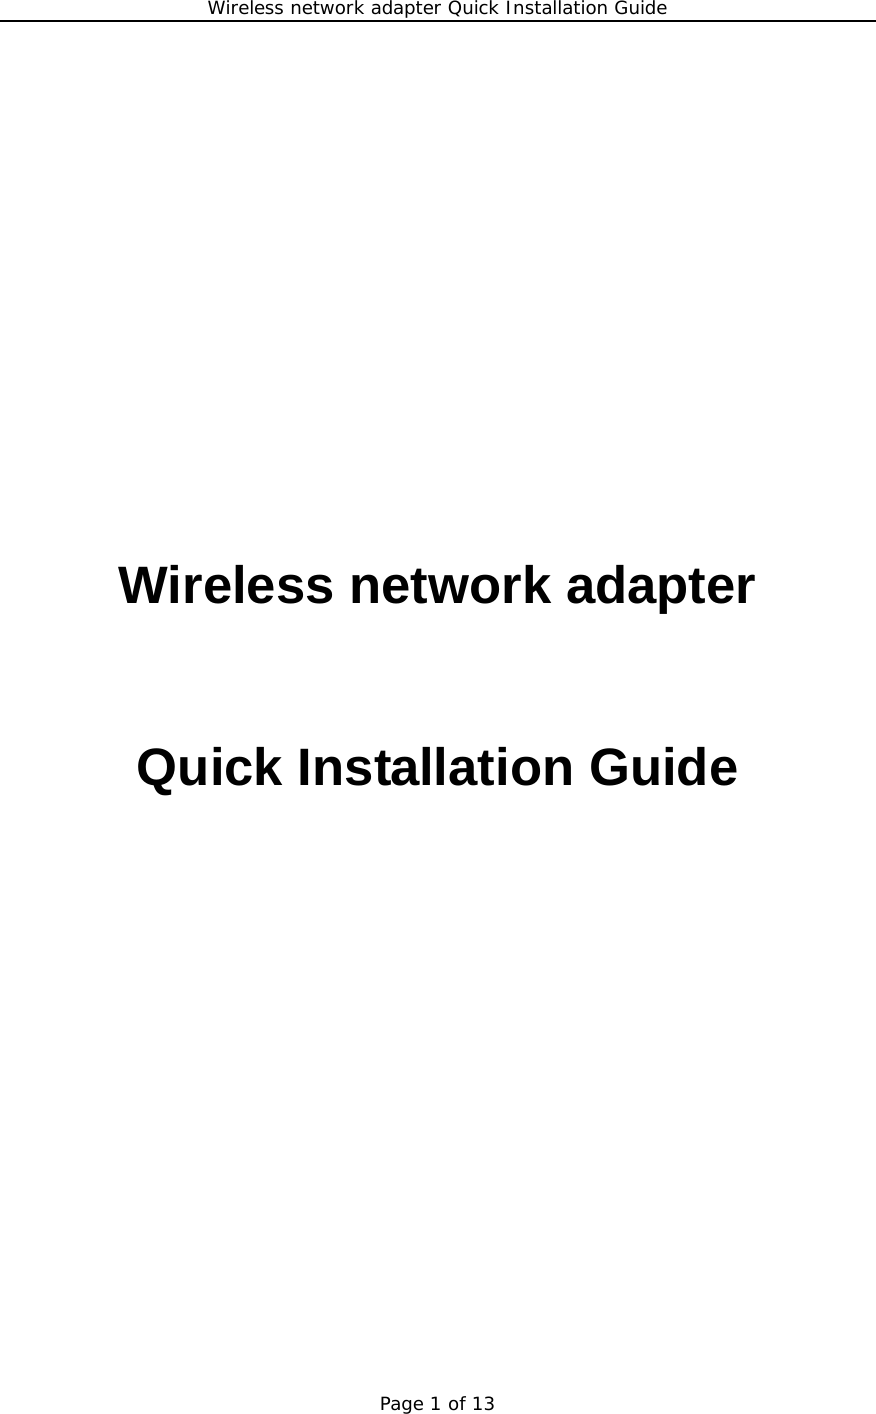 Wireless network adapter Quick Installation Guide Page 1 of 13              Wireless network adapter   Quick Installation Guide          